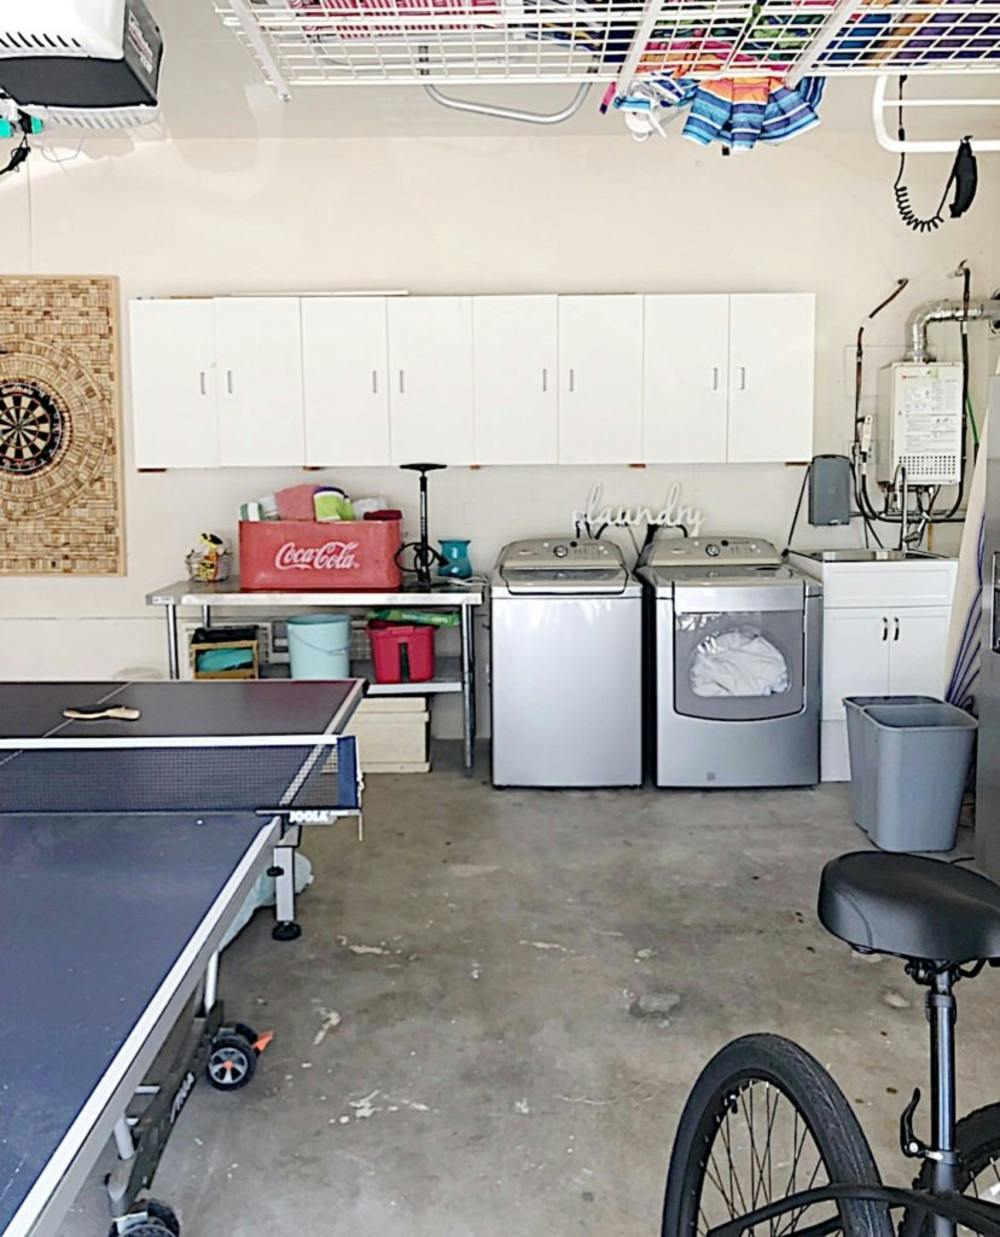 https://images.prismic.io/containerstoriesproduction/97df70a7a55765b57316e74ae23015f2a8149055_garage-makeover-before-photo.jpg?auto=compress,format